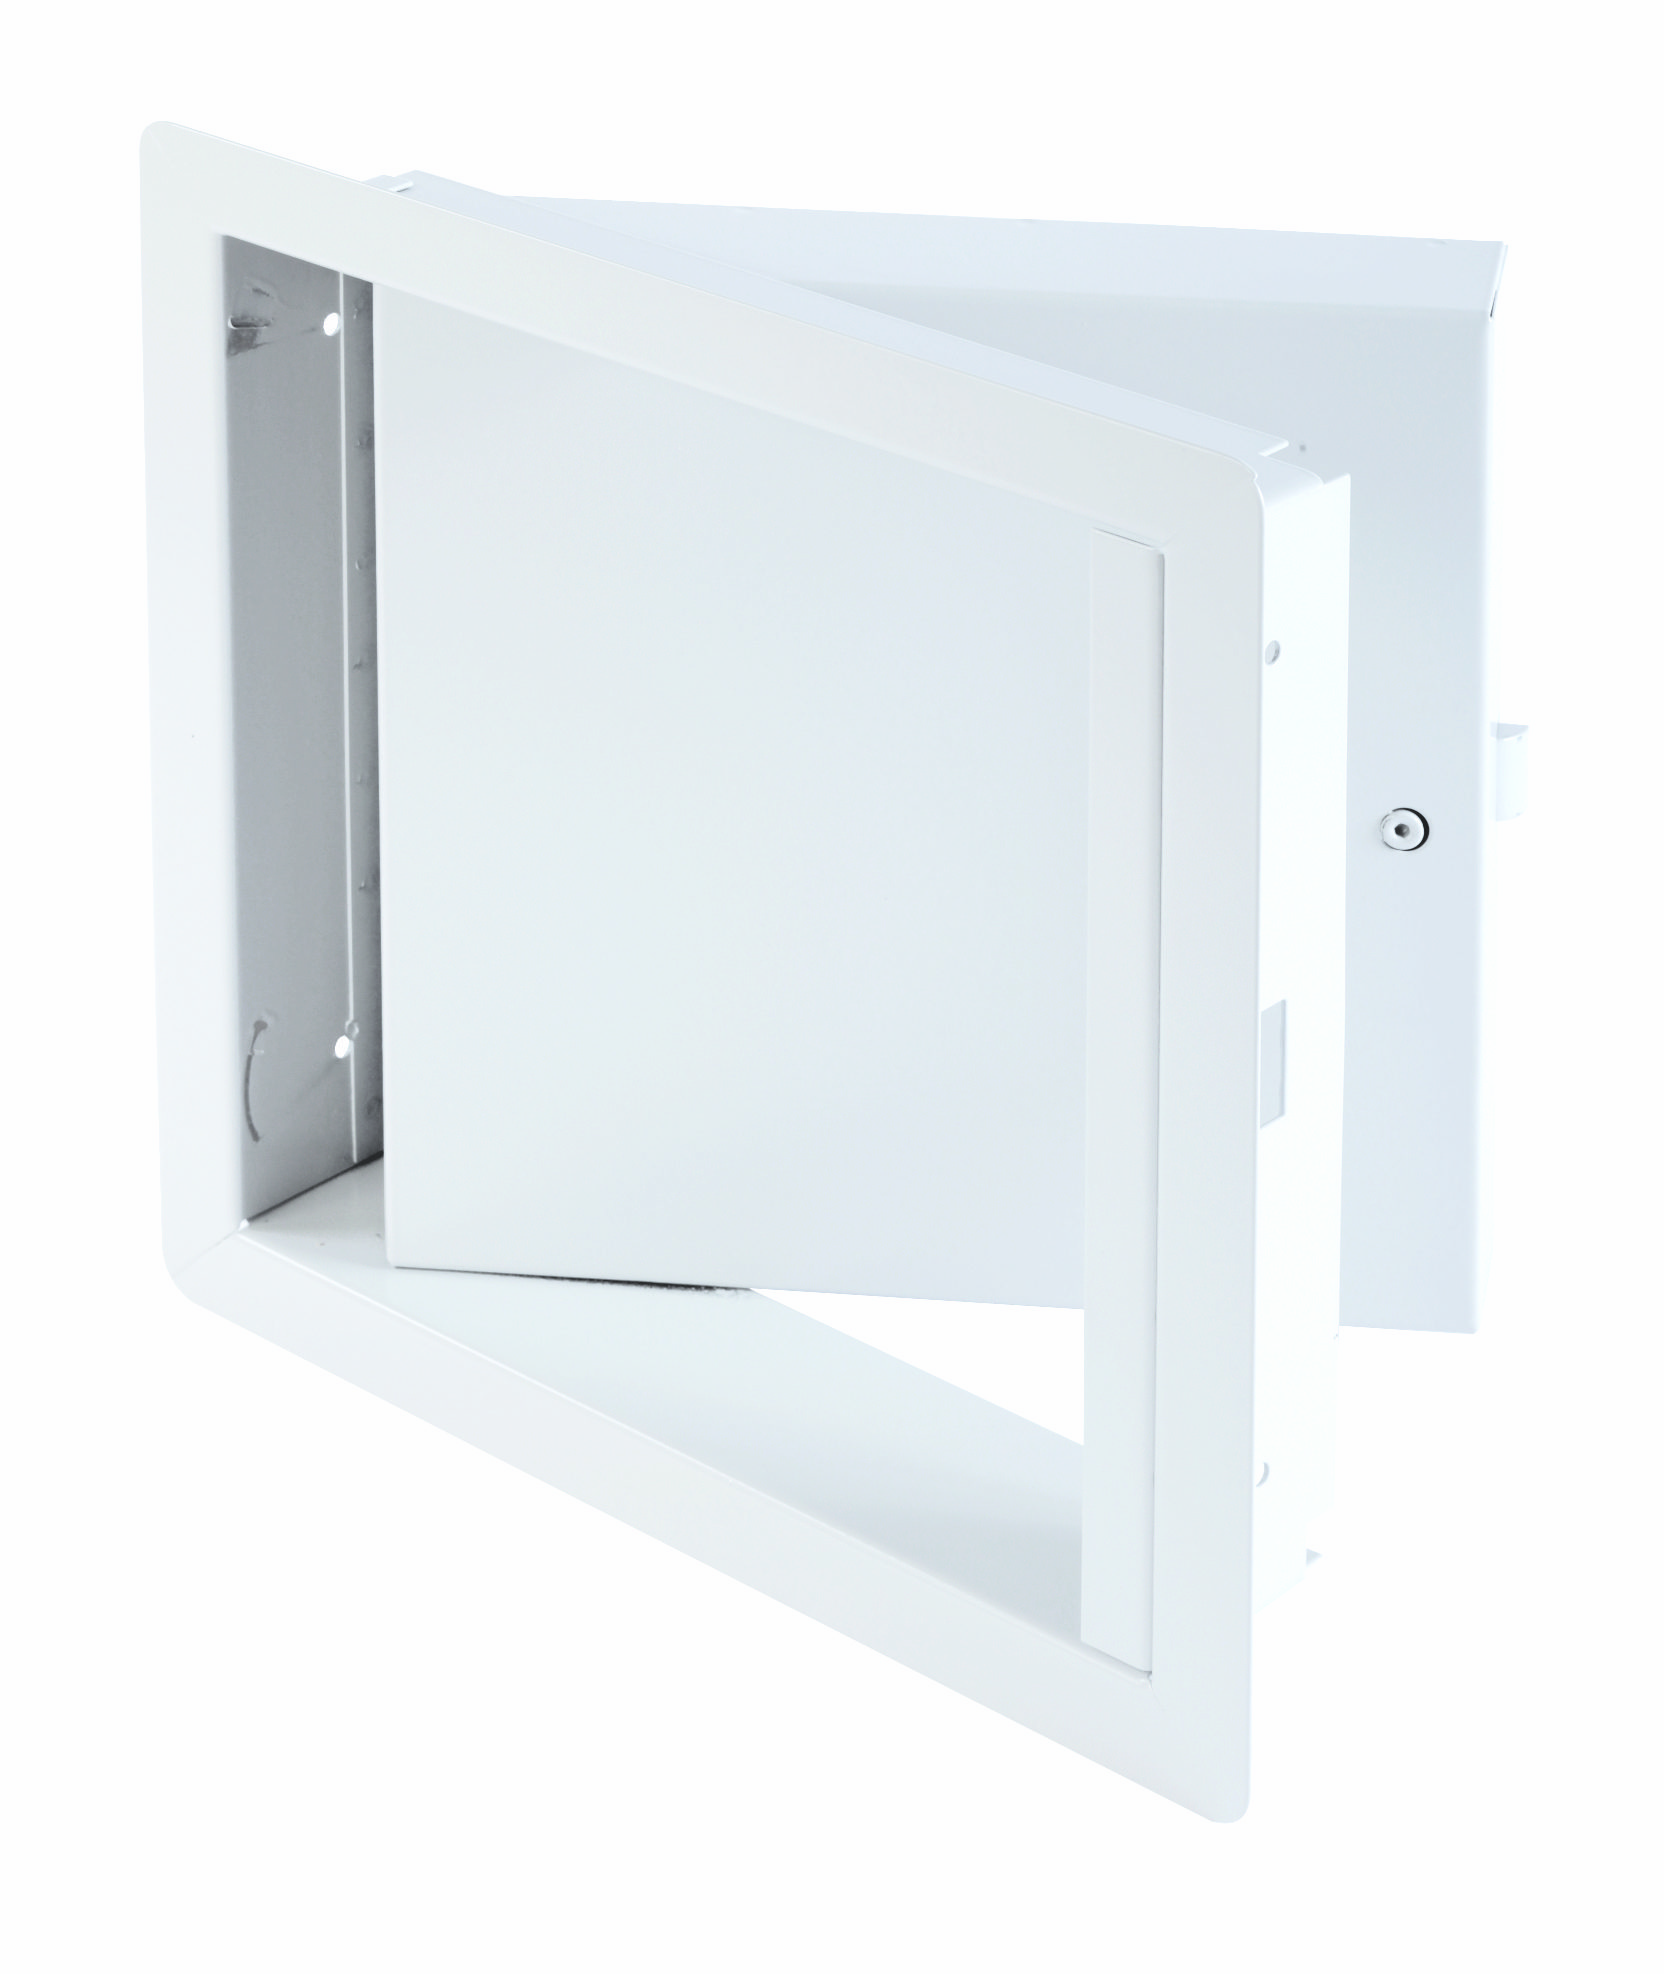 PFU-00- Fire-Rated Insulated Upward Opening Access Door with Exposed Flange. Hex head and ring key operated slam latch. Piano hinge.